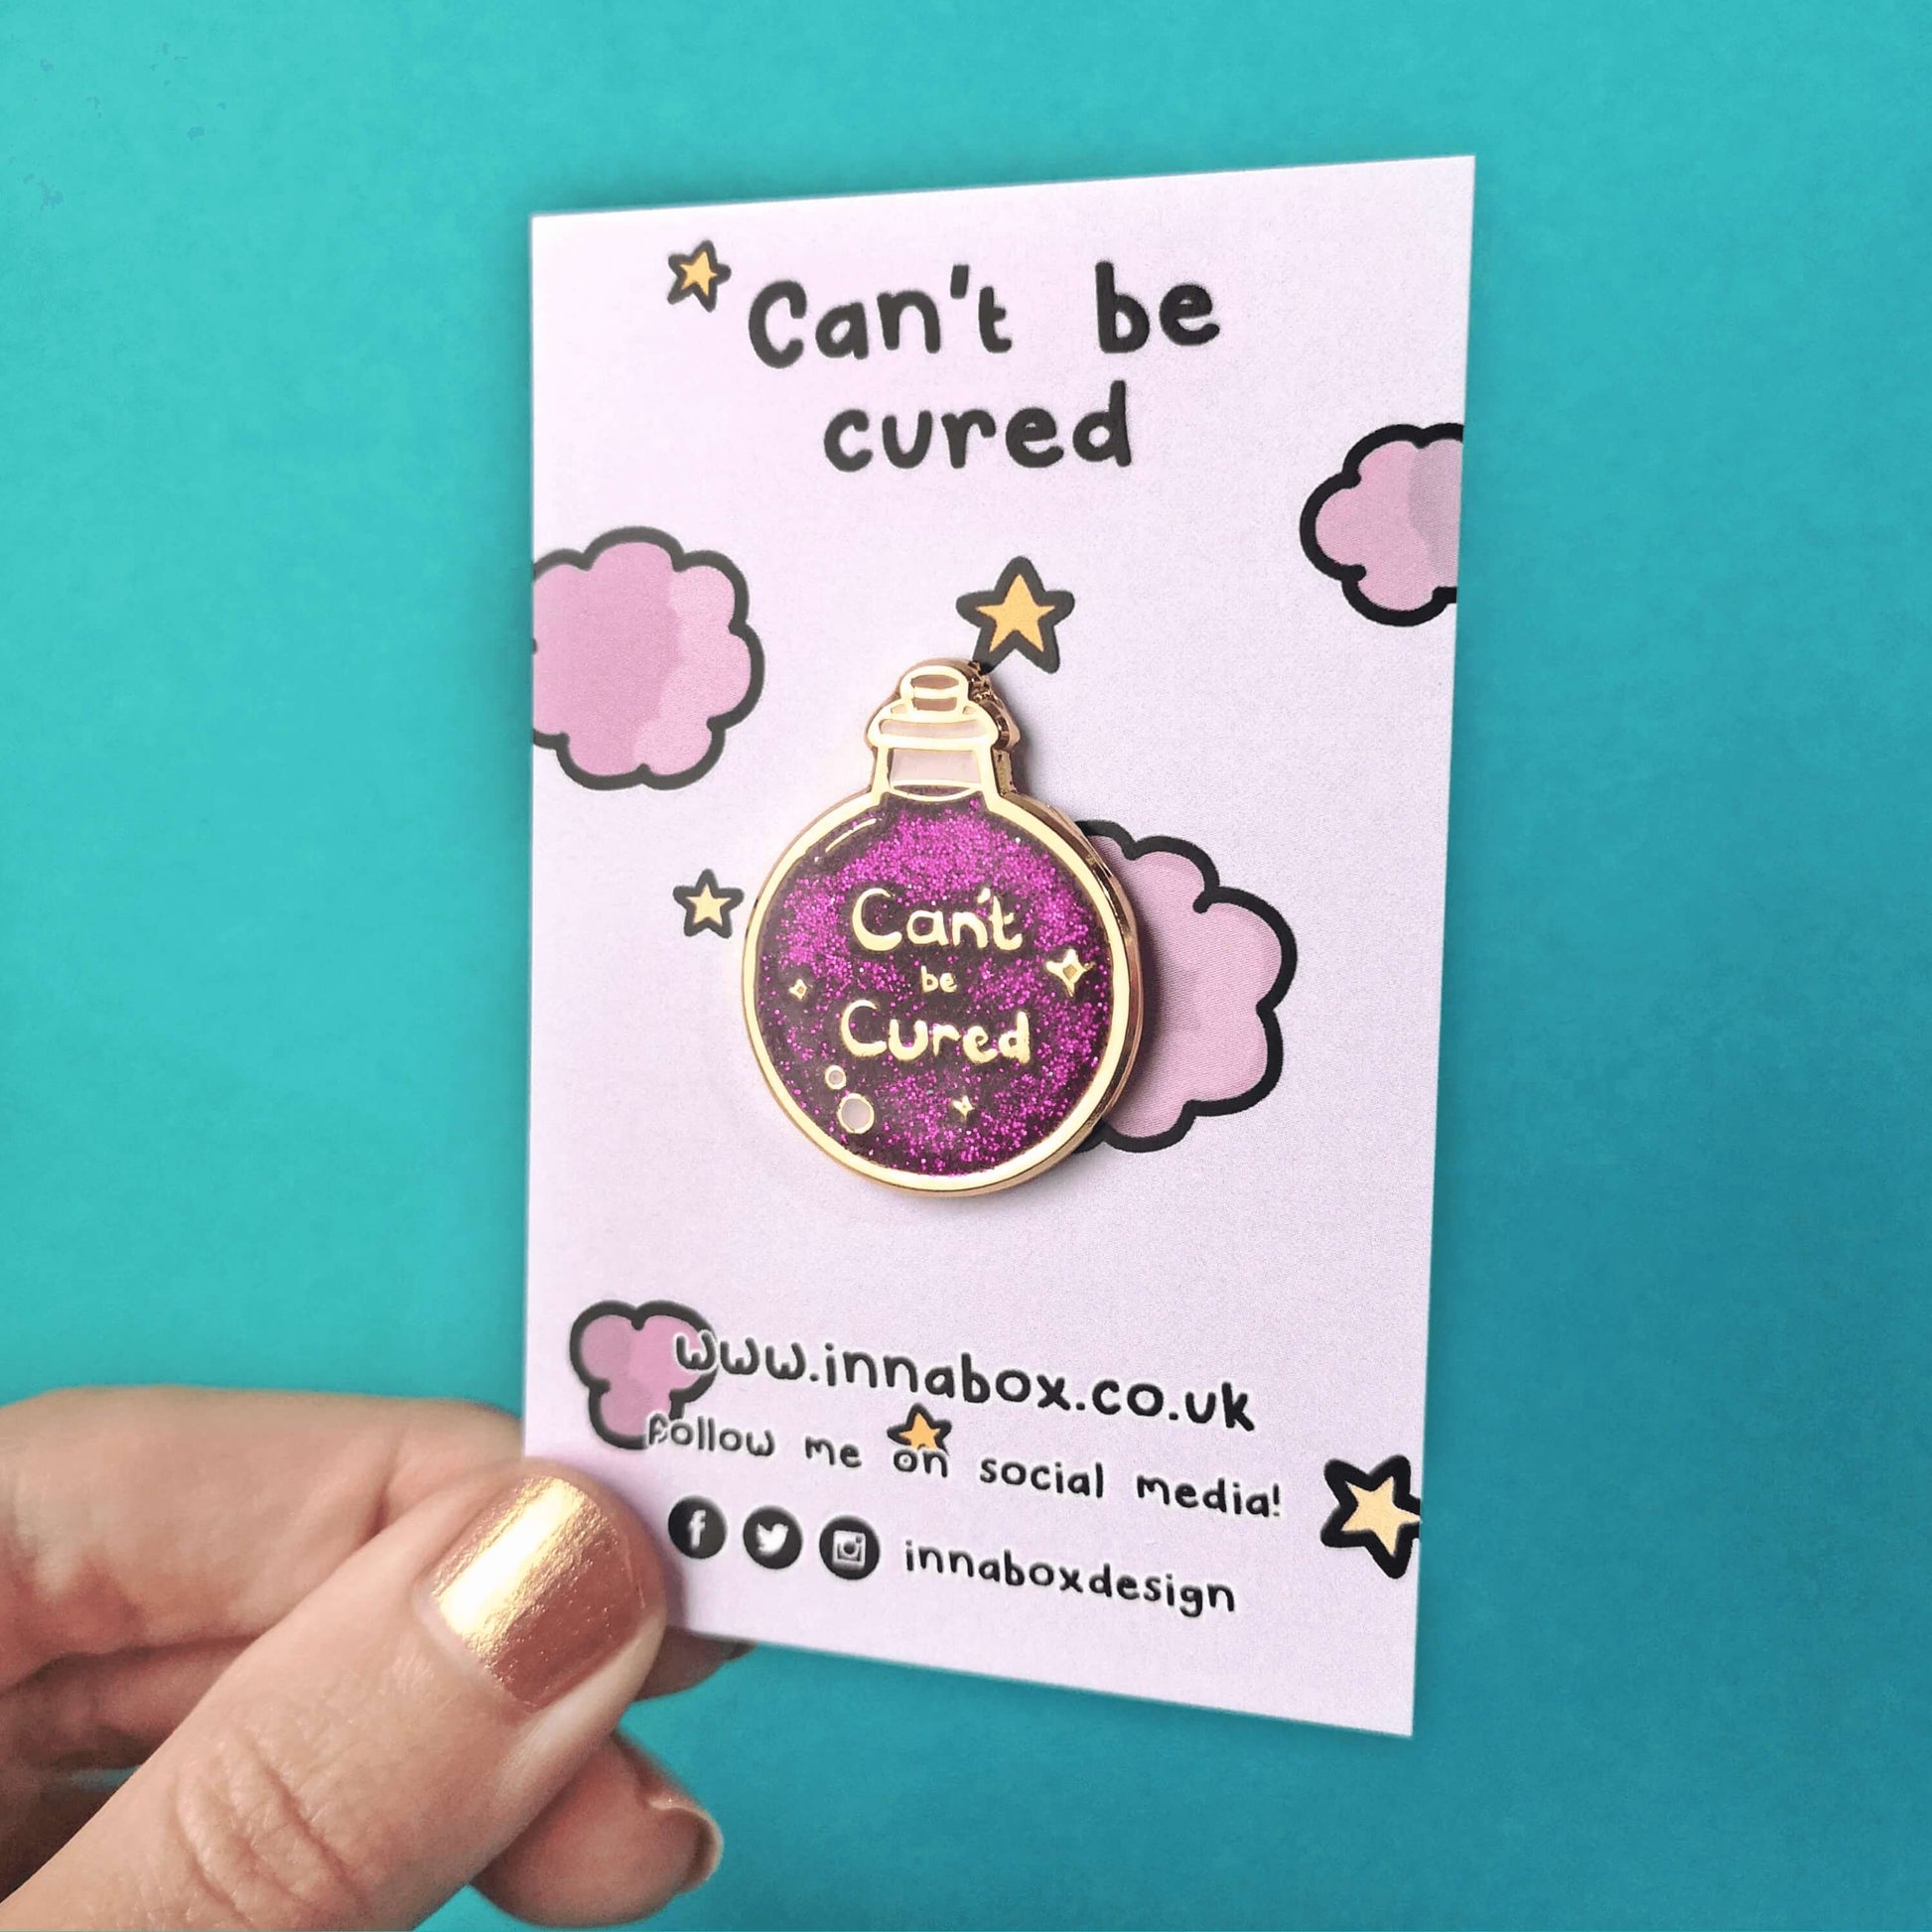 The Can't Be Cured Potion Bottle Enamel Pin on a lilac backing card with purple clouds and yellow stars, with can't be cured written at the top and innabox social media handles written at the bottom both in black, being held over a blue background. The pin is a gold outlined circular potion bottle with a glittery purple middle with two pastel pink bubbles, gold sparkles and gold text that reads 'can't be cured'. The design was inspired by chronic illnesses.